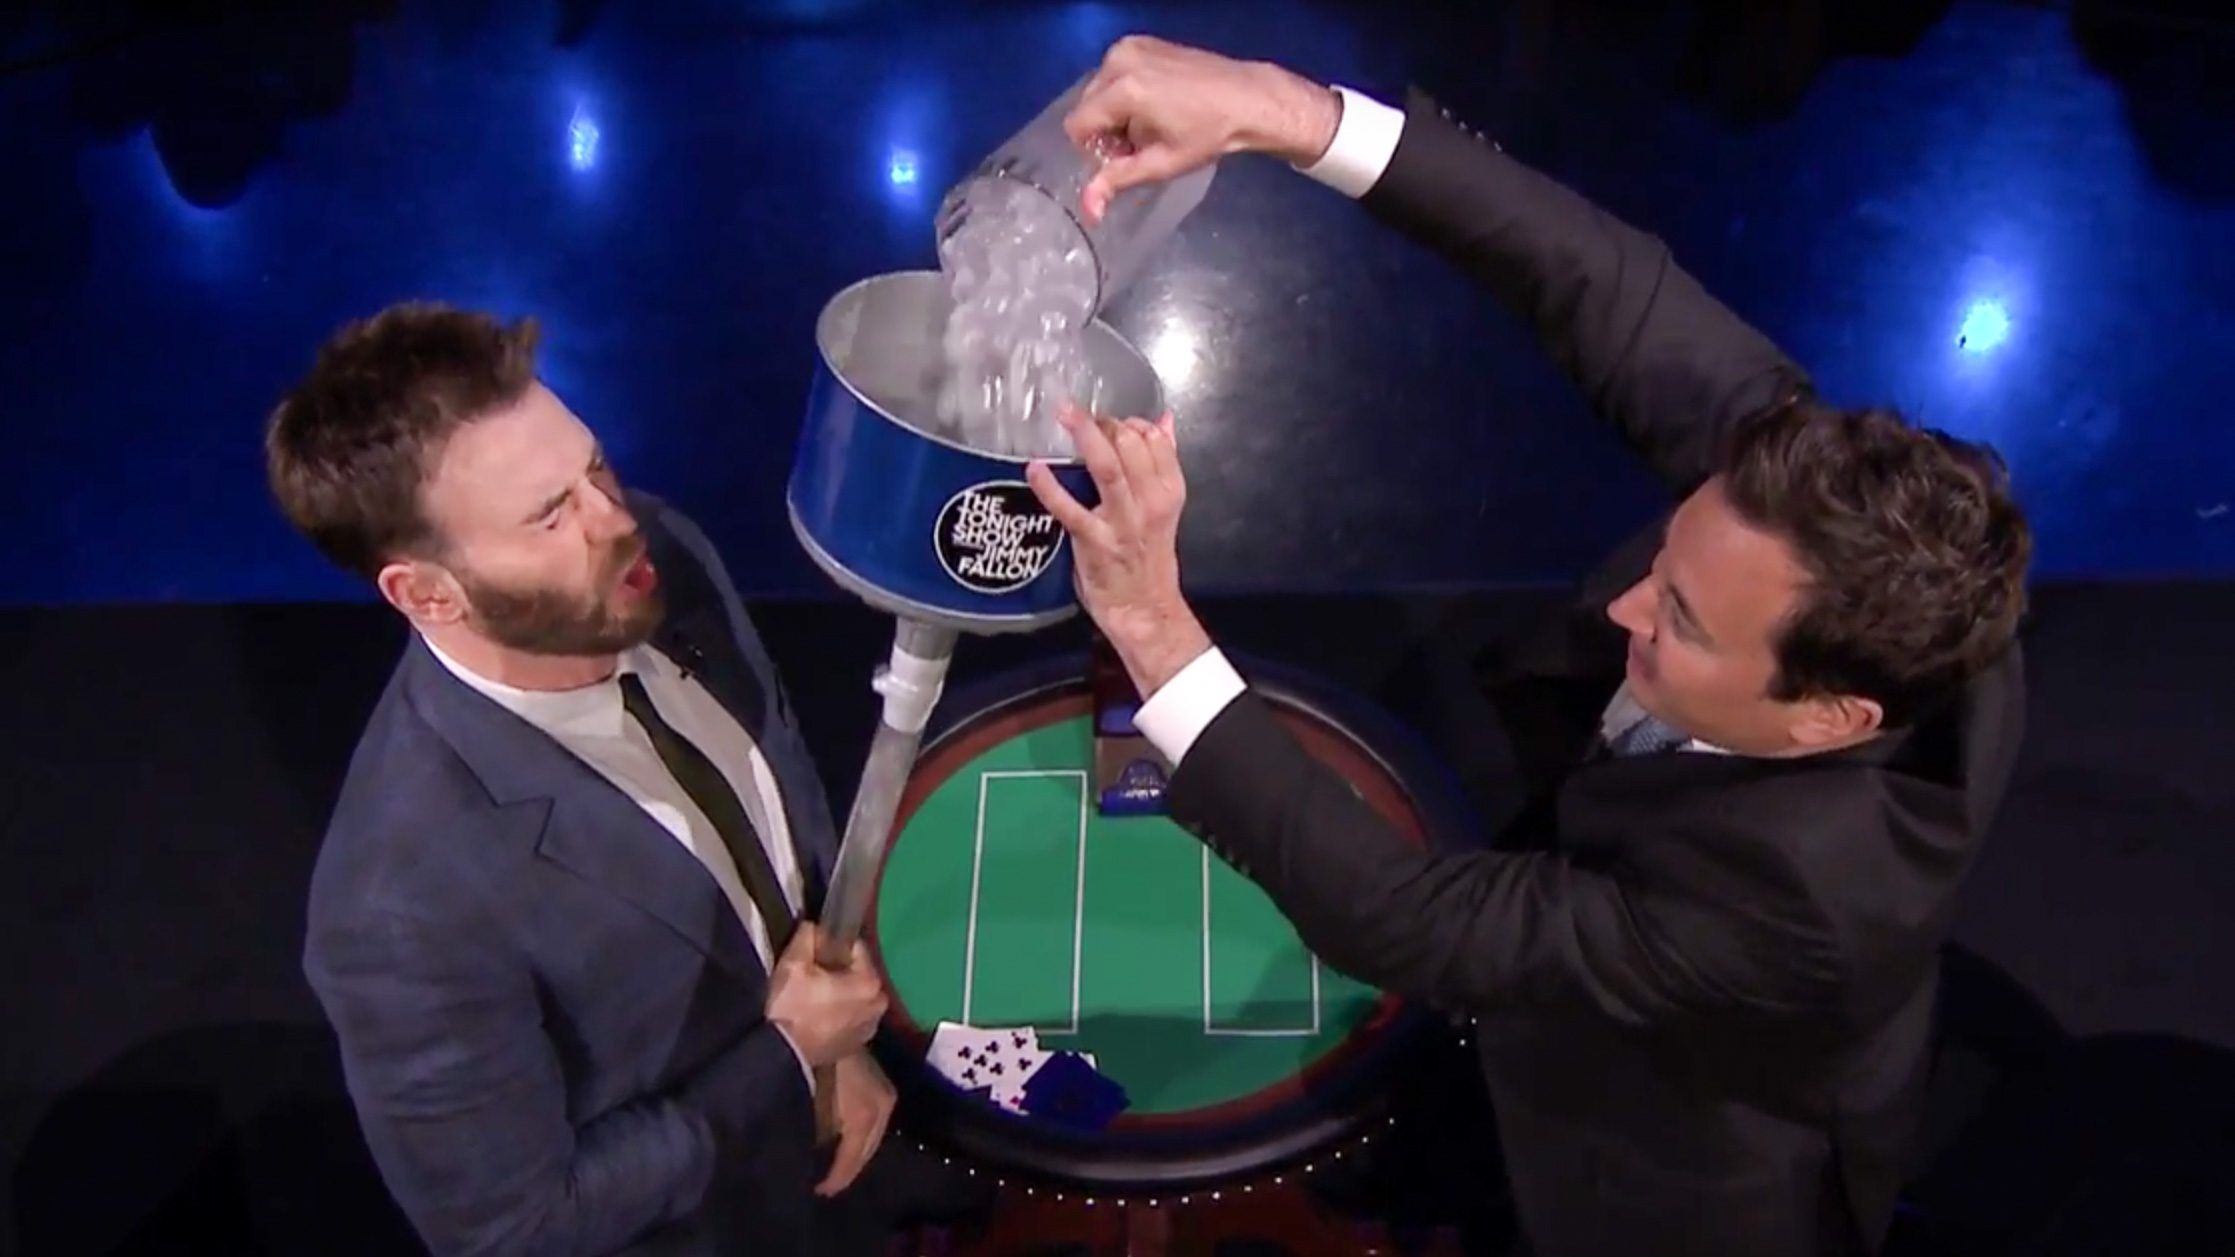 WATCH: Chris Evans gets a ton of ice-cold water poured down his pants